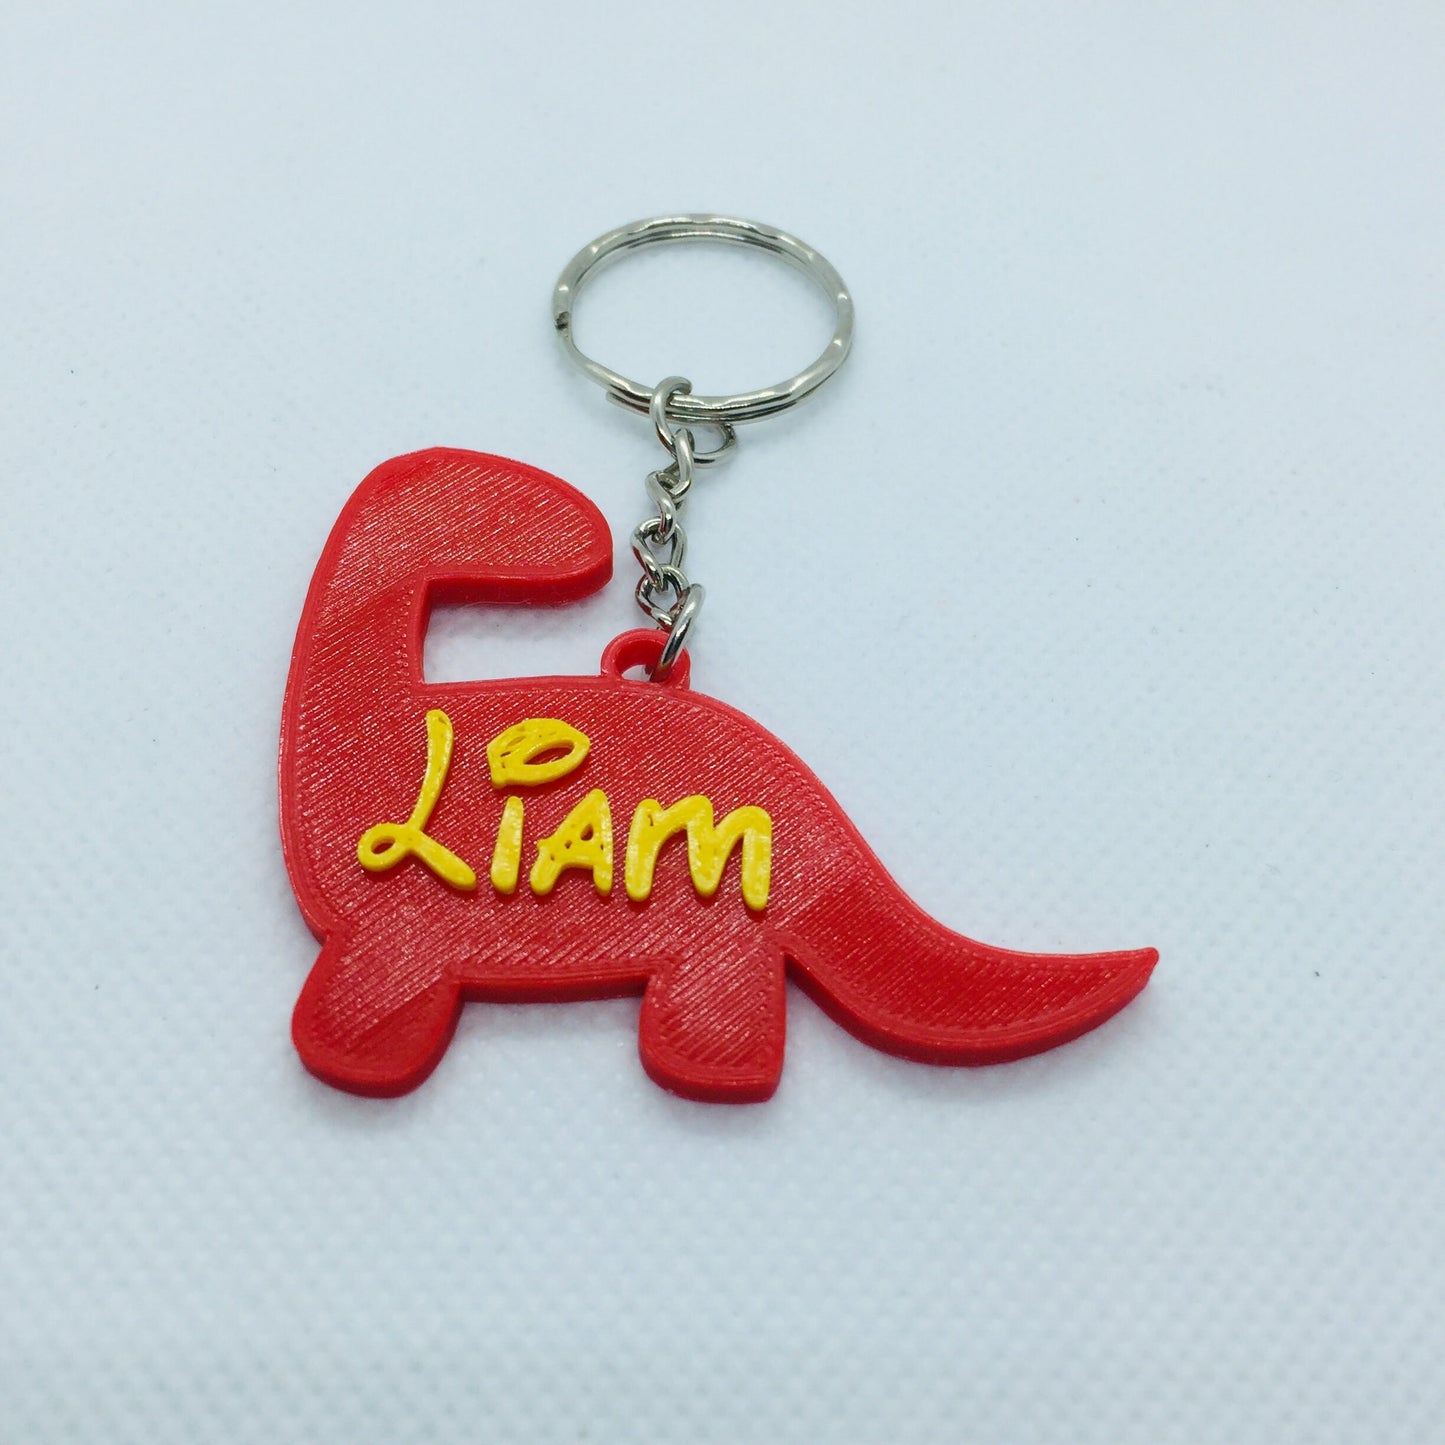 Personalised Dinosaur Key Ring, Disney Style Font Keychain, Gifts under 5, Party Bag Filler,3D printed keychain, Custom, Stocking Filler